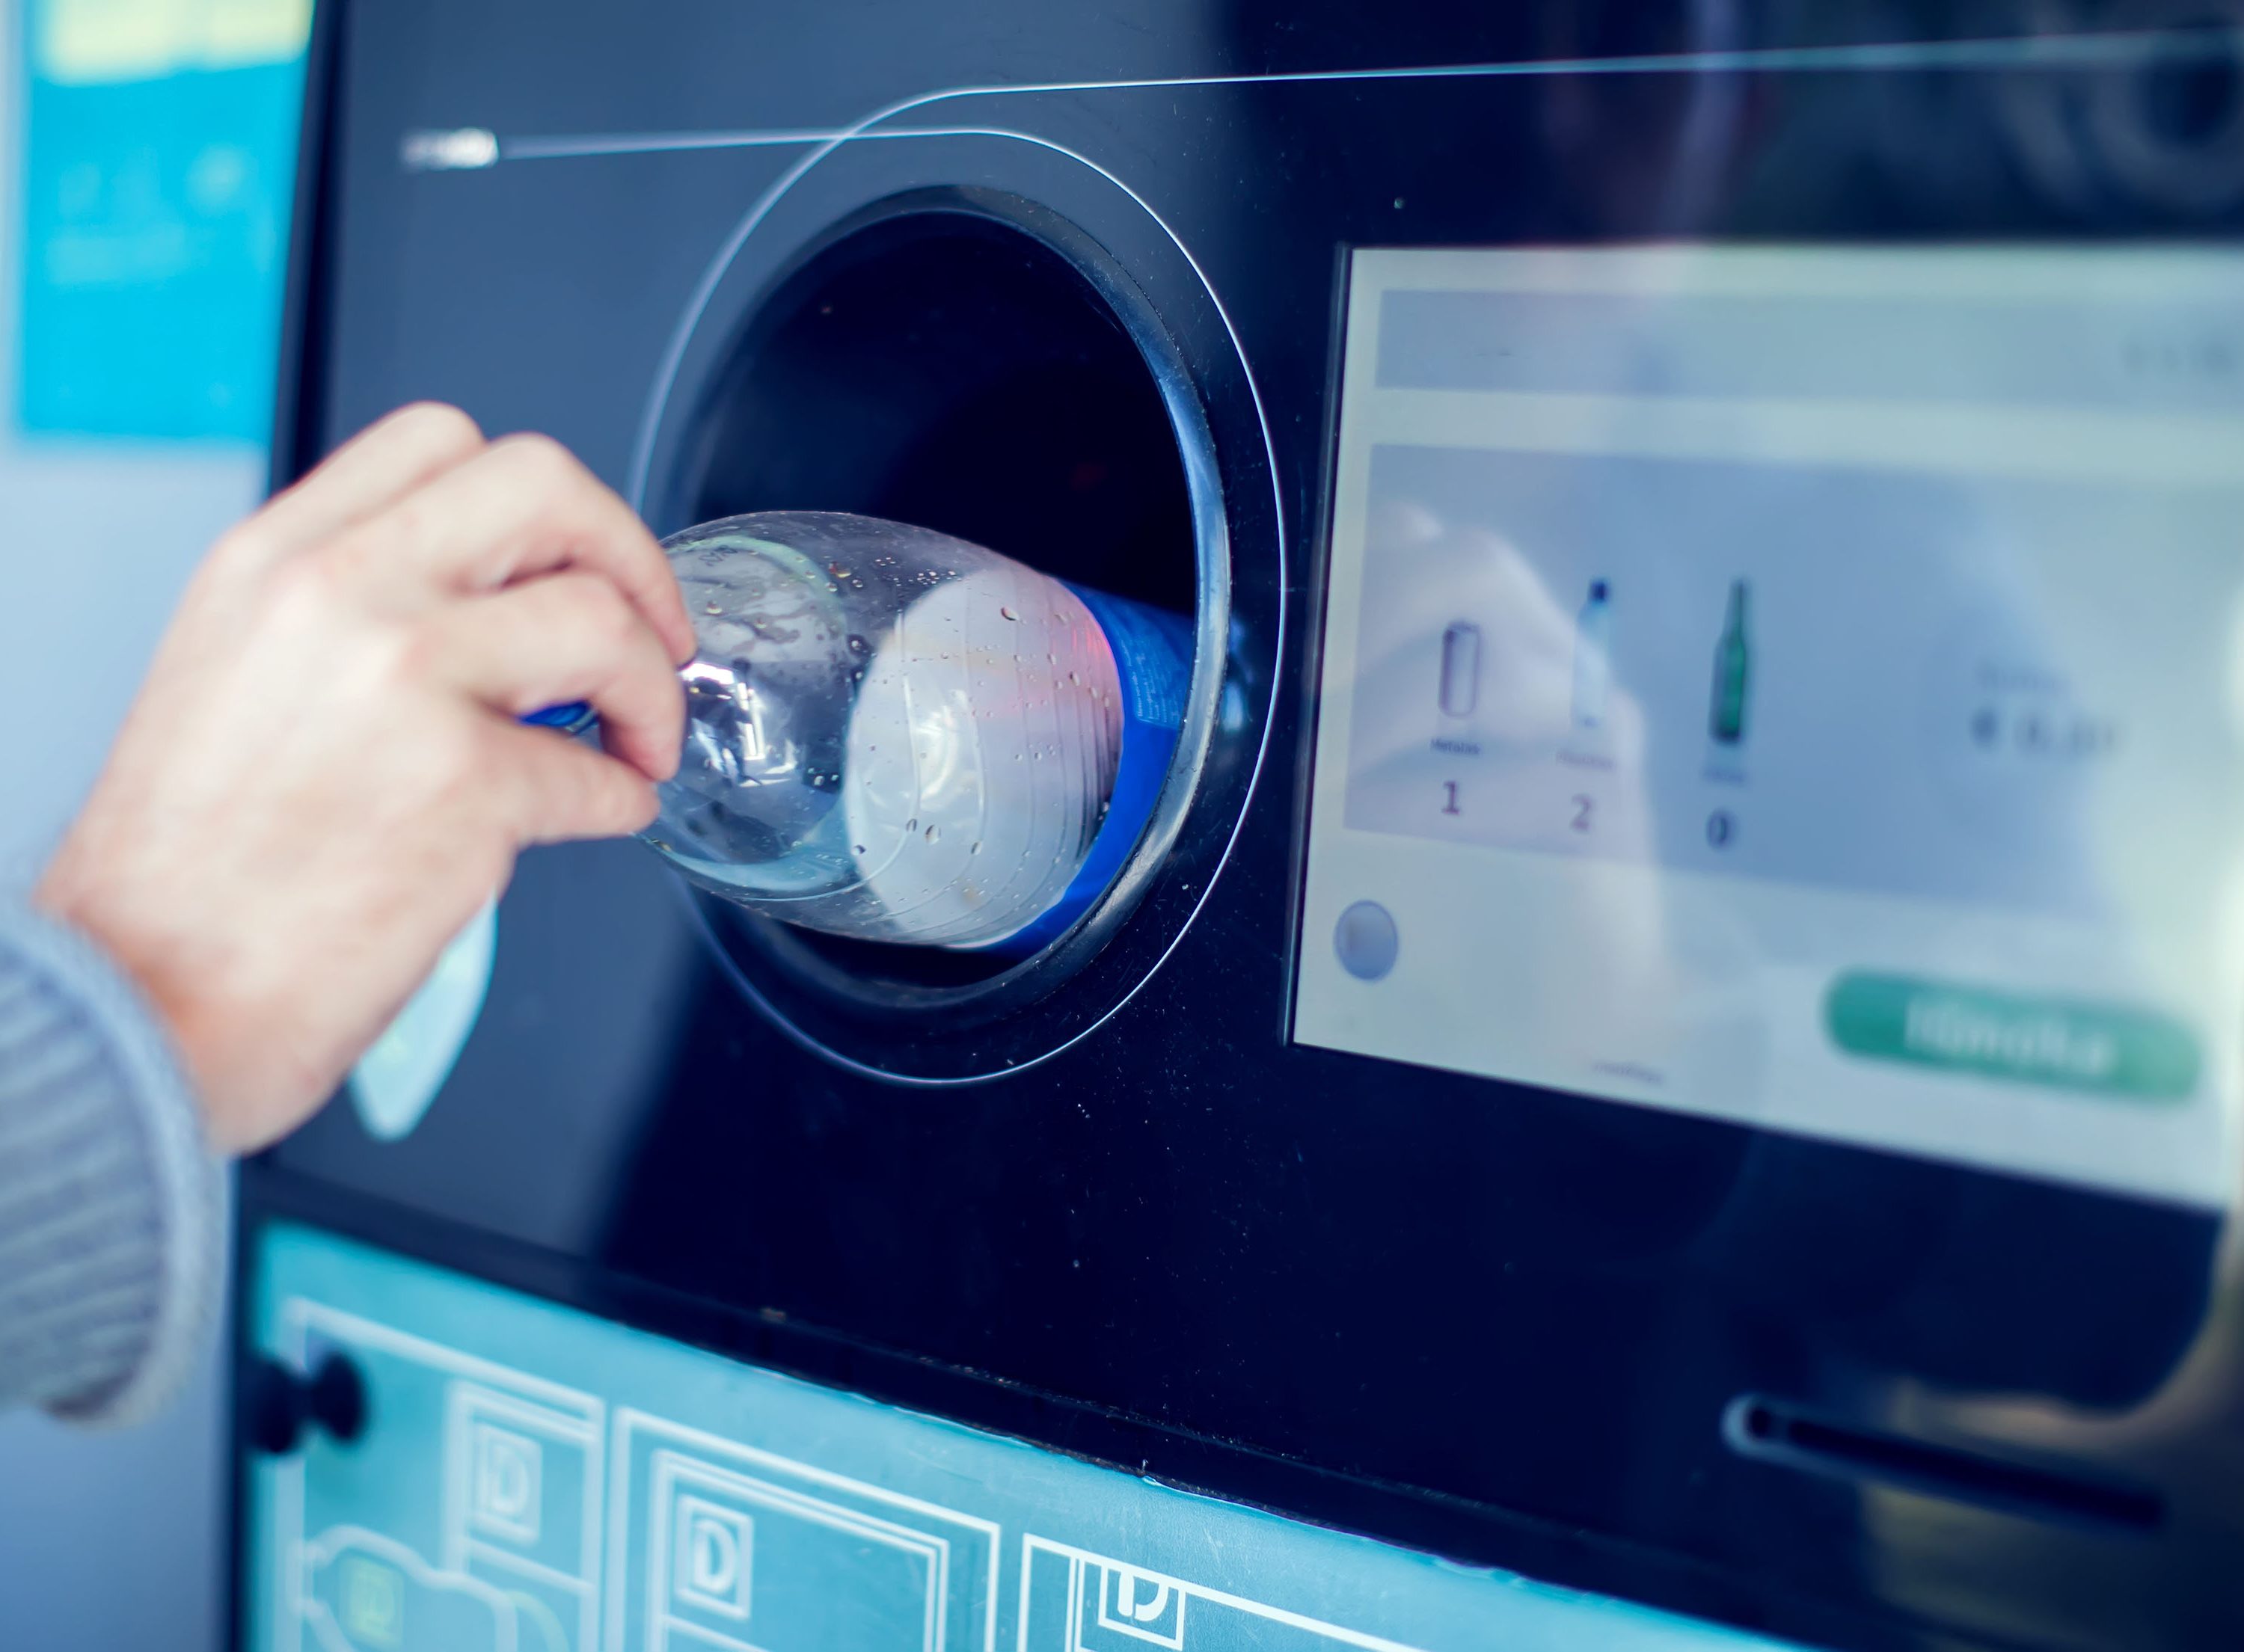 The Uprising of the Reverse Vending Machine